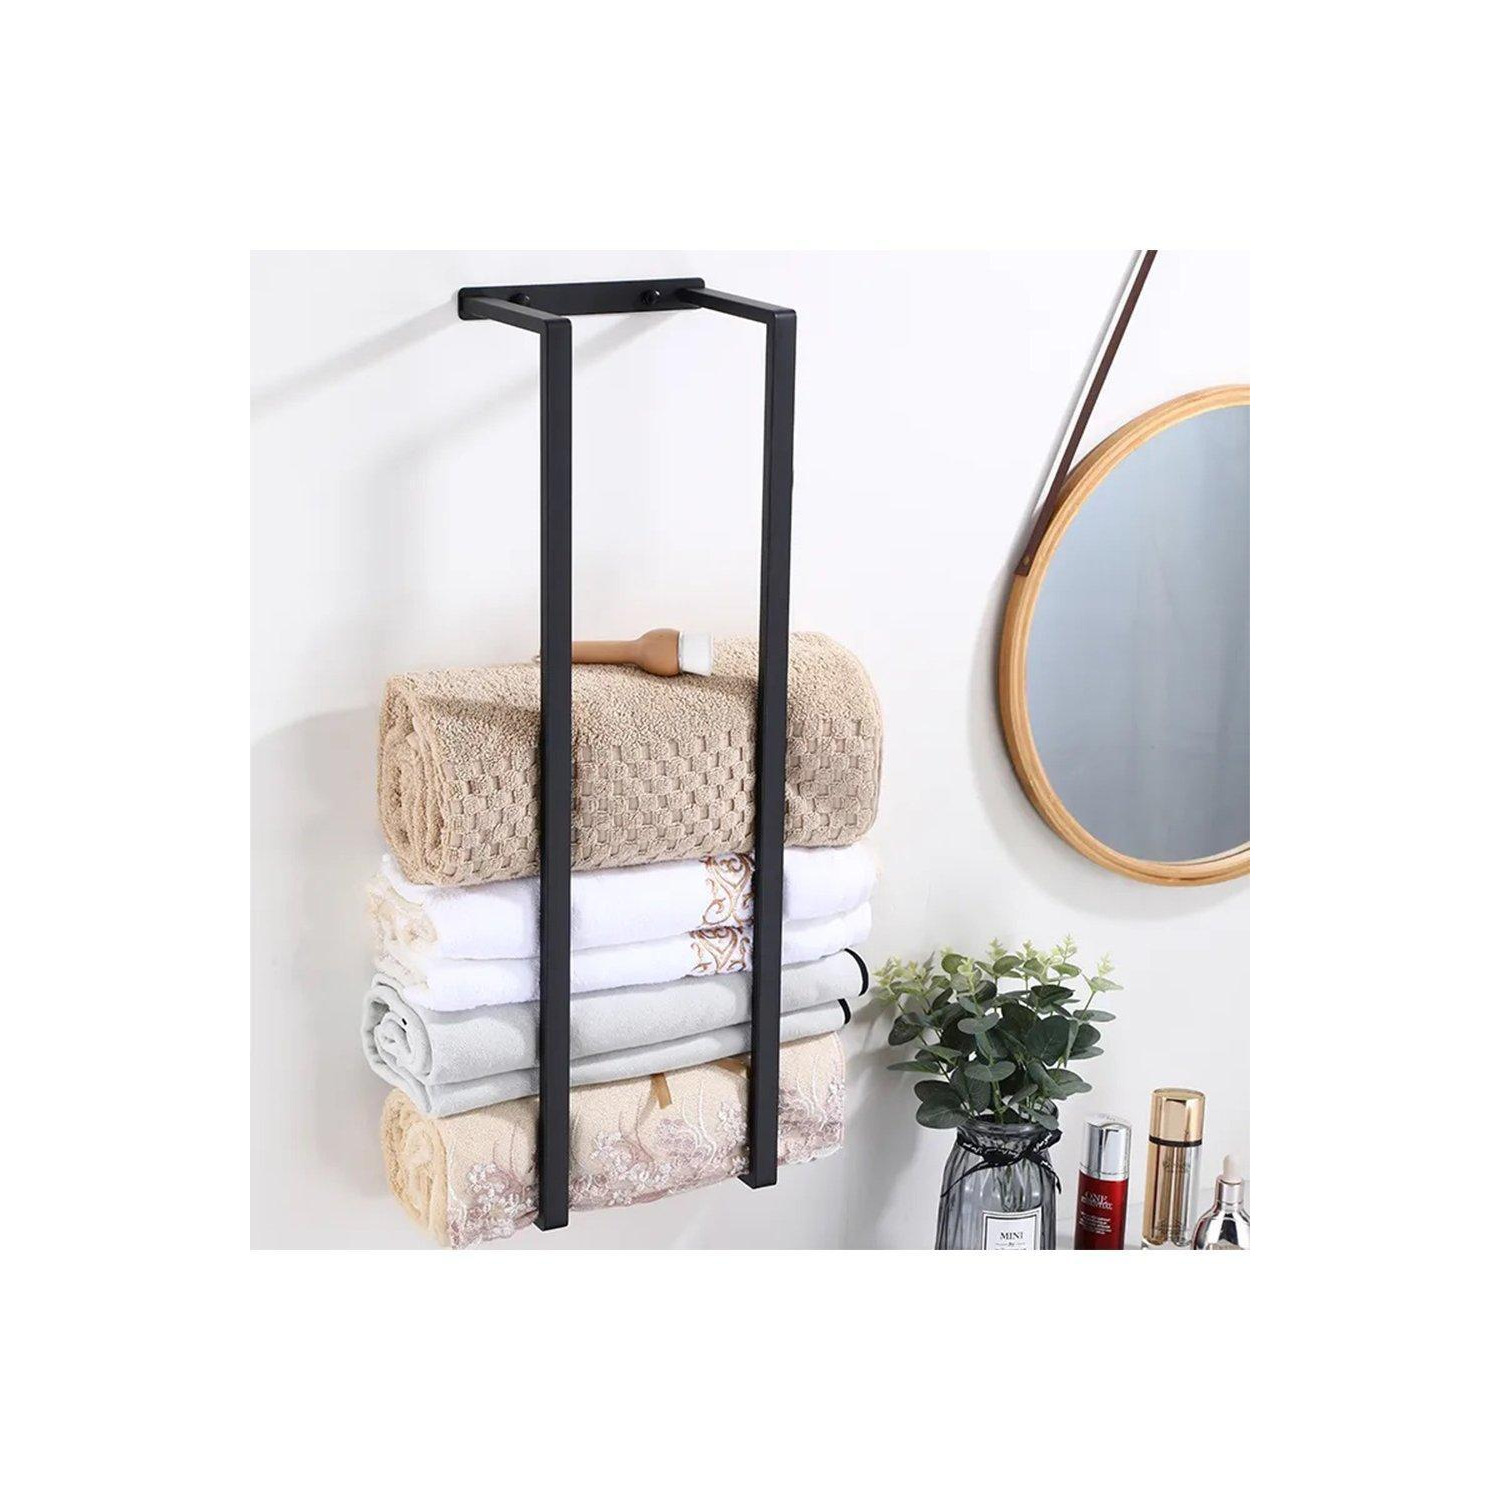 Modern Carbon Steel Wall Towel Rack with Hooks - image 1